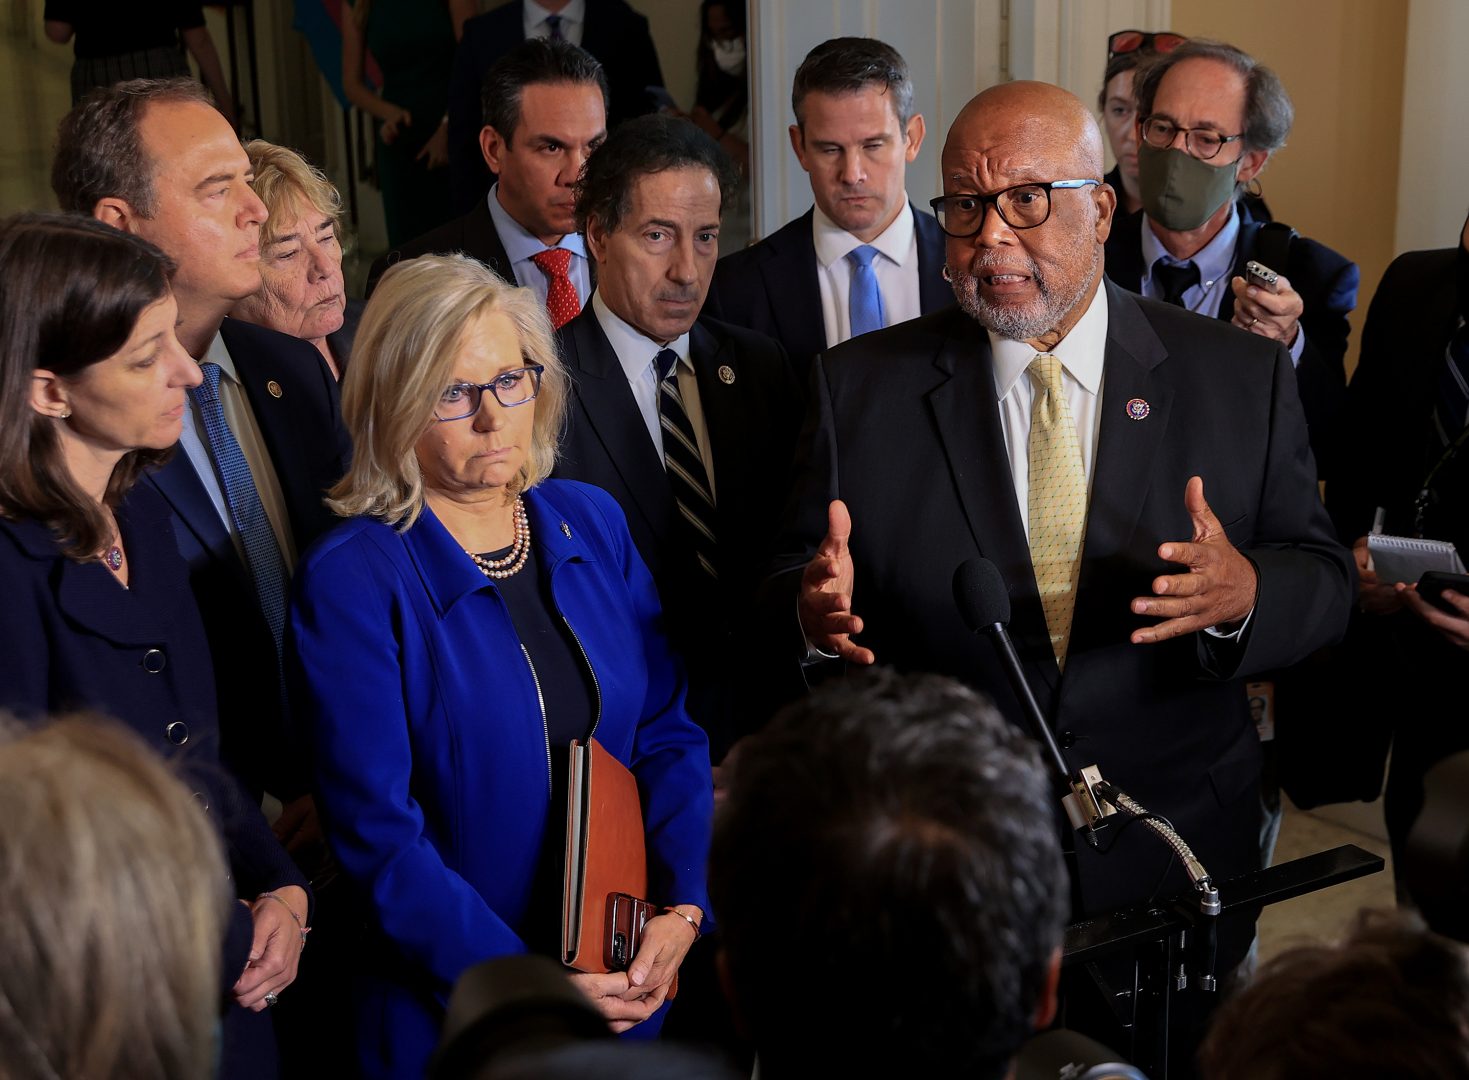 Reps. Bennie Thompson (right) and Liz Cheney, joined by fellow committee members, speak to the media after a July 27 hearing of the House select committee investigating the Jan. 6 attack on the U.S. Capitol.